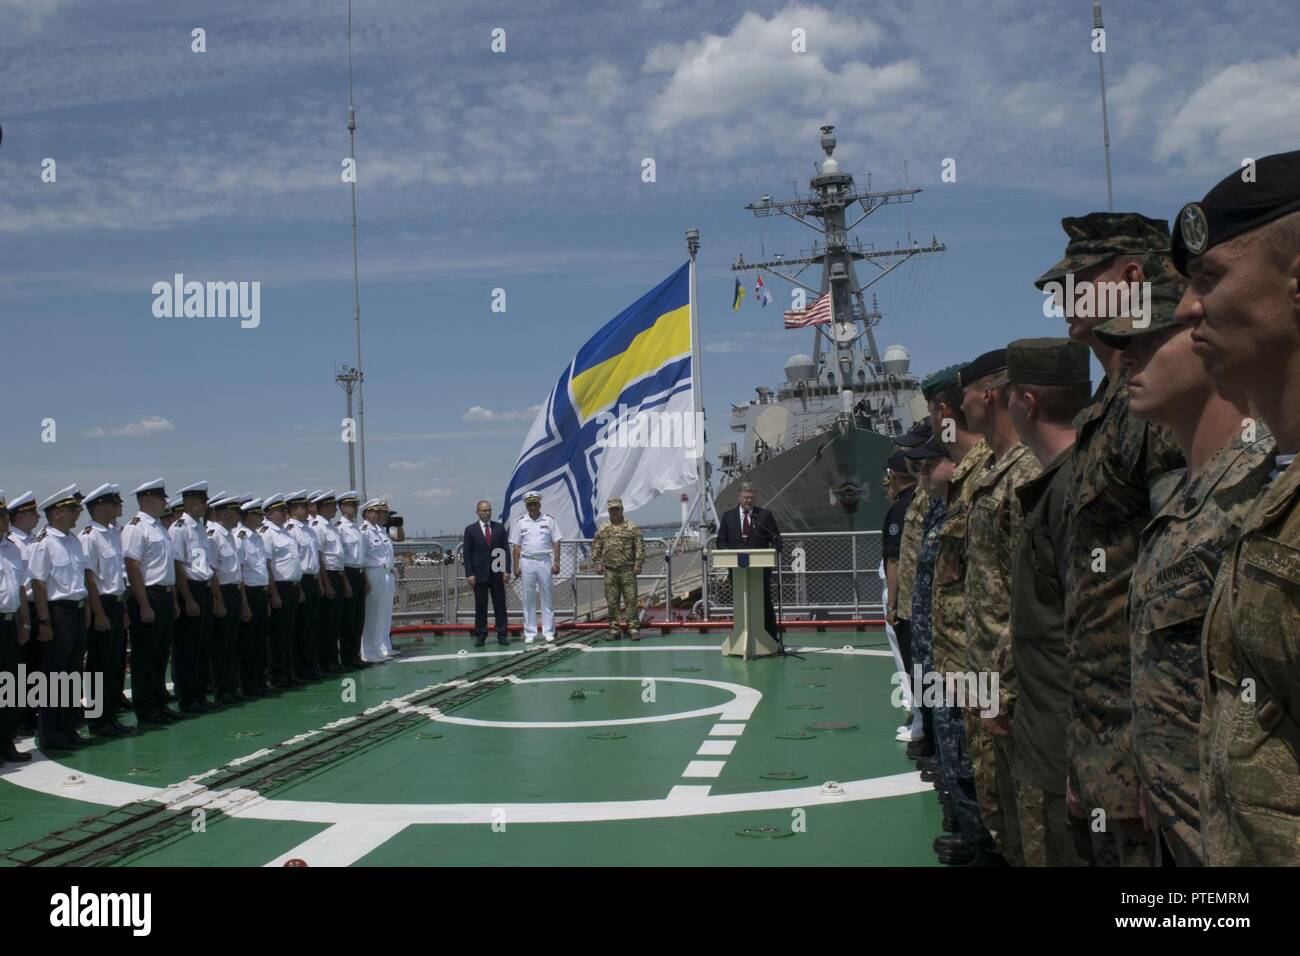 ODESSA, Ukraine (July 17, 2017) The President of Ukraine Petro Poroshenko, center, speaks during a ceremony aboard the Ukrainian frigate Hetman Sahaydachniy (U 130) during exercise Sea Breeze 2017 in Odessa, Ukraine, July 17. Behind him are, from left, Maksym Stepanov, the governor of Odessa province; Vice Adm. Ihor Voronchenko, the commander of the Ukrainian Navy; and Gen. Stepan Poltorak, the minister of defense of Ukraine. Sea Breeze is a U.S. and Ukraine co-hosted multinational maritime exercise held in the Black Sea and is designed to enhance interoperability of participating nations and  Stock Photo